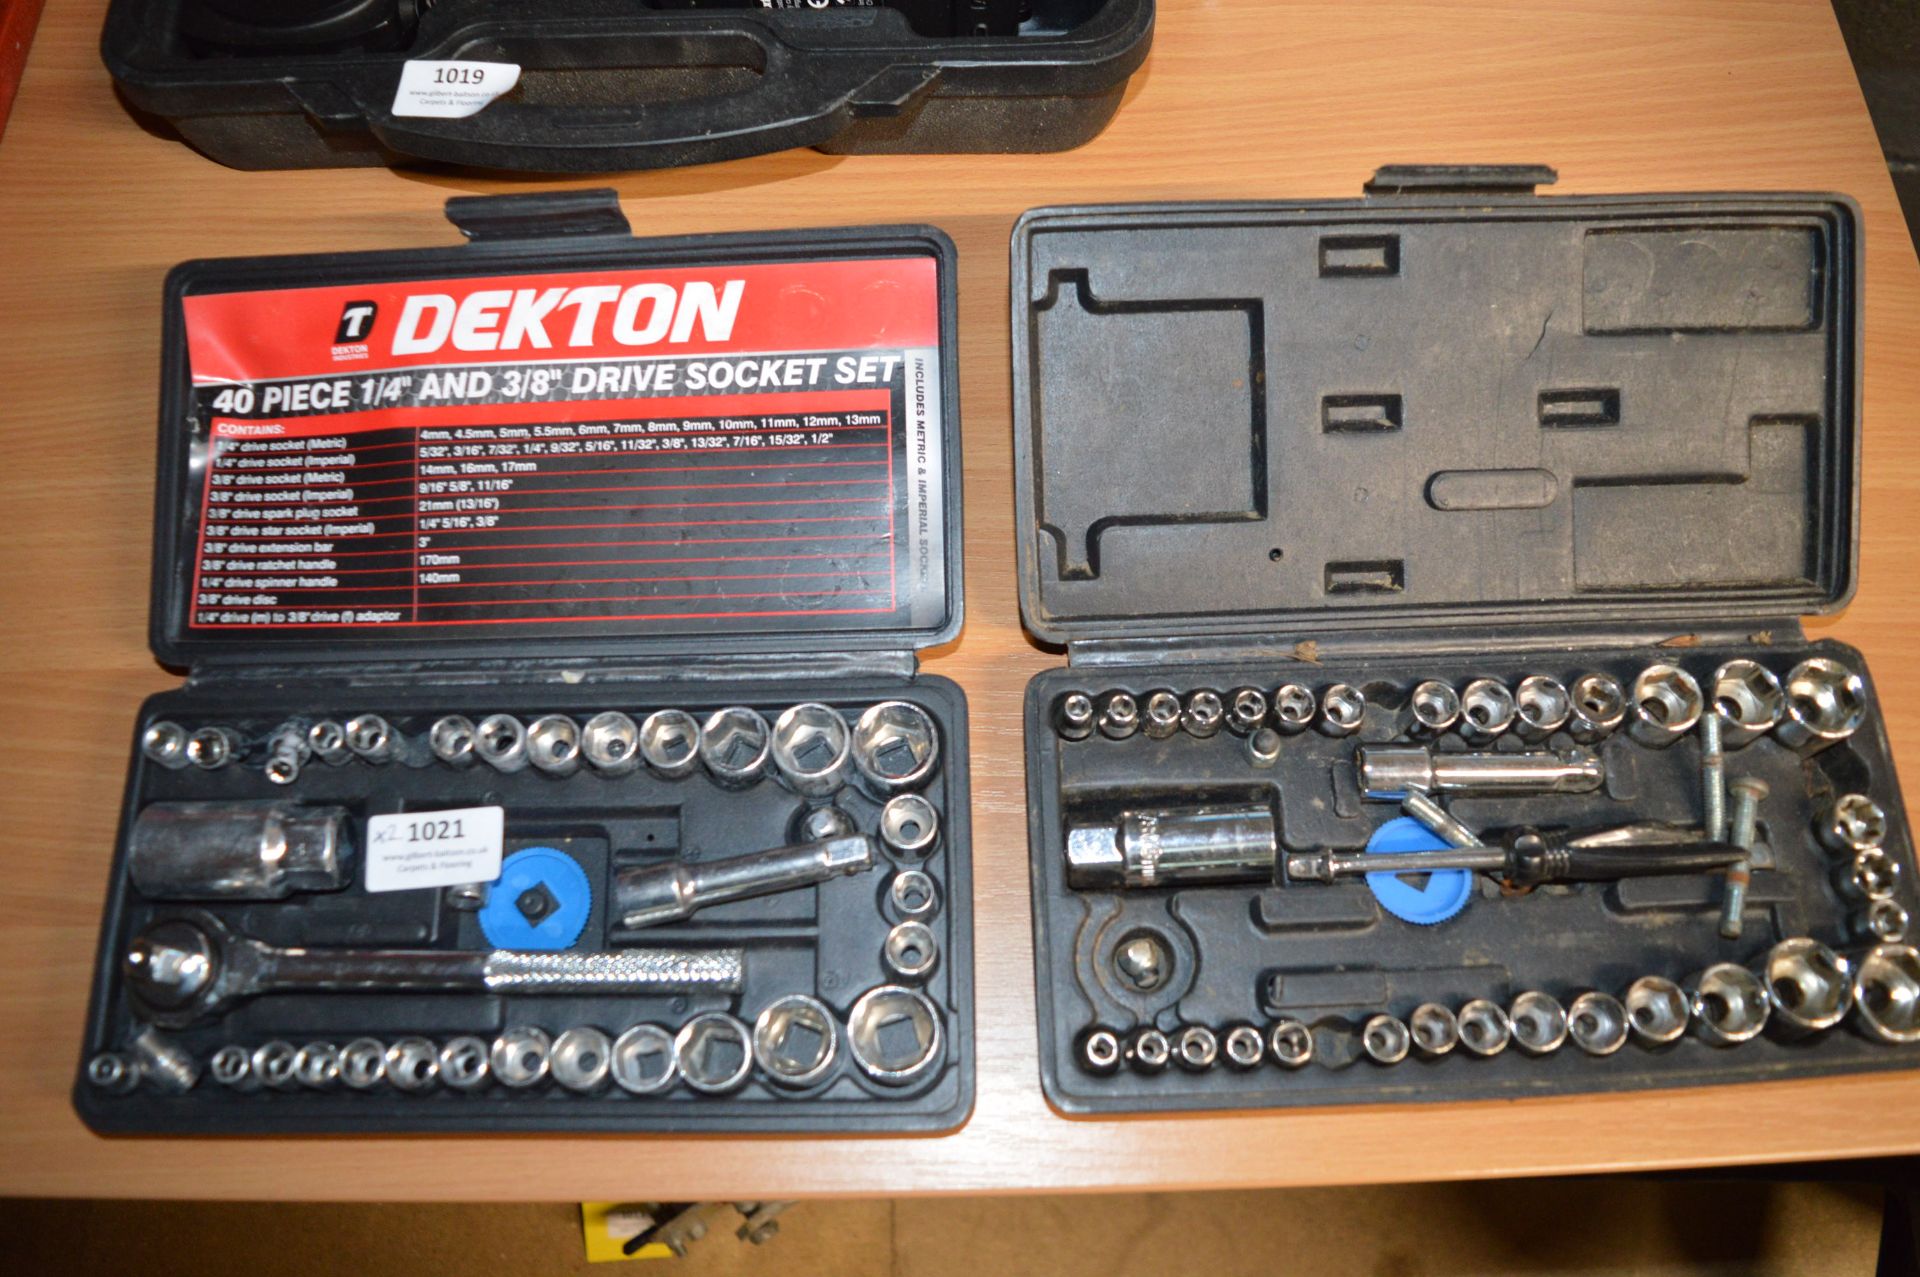 One 1/4” and 3/8” Drive Socket Sets